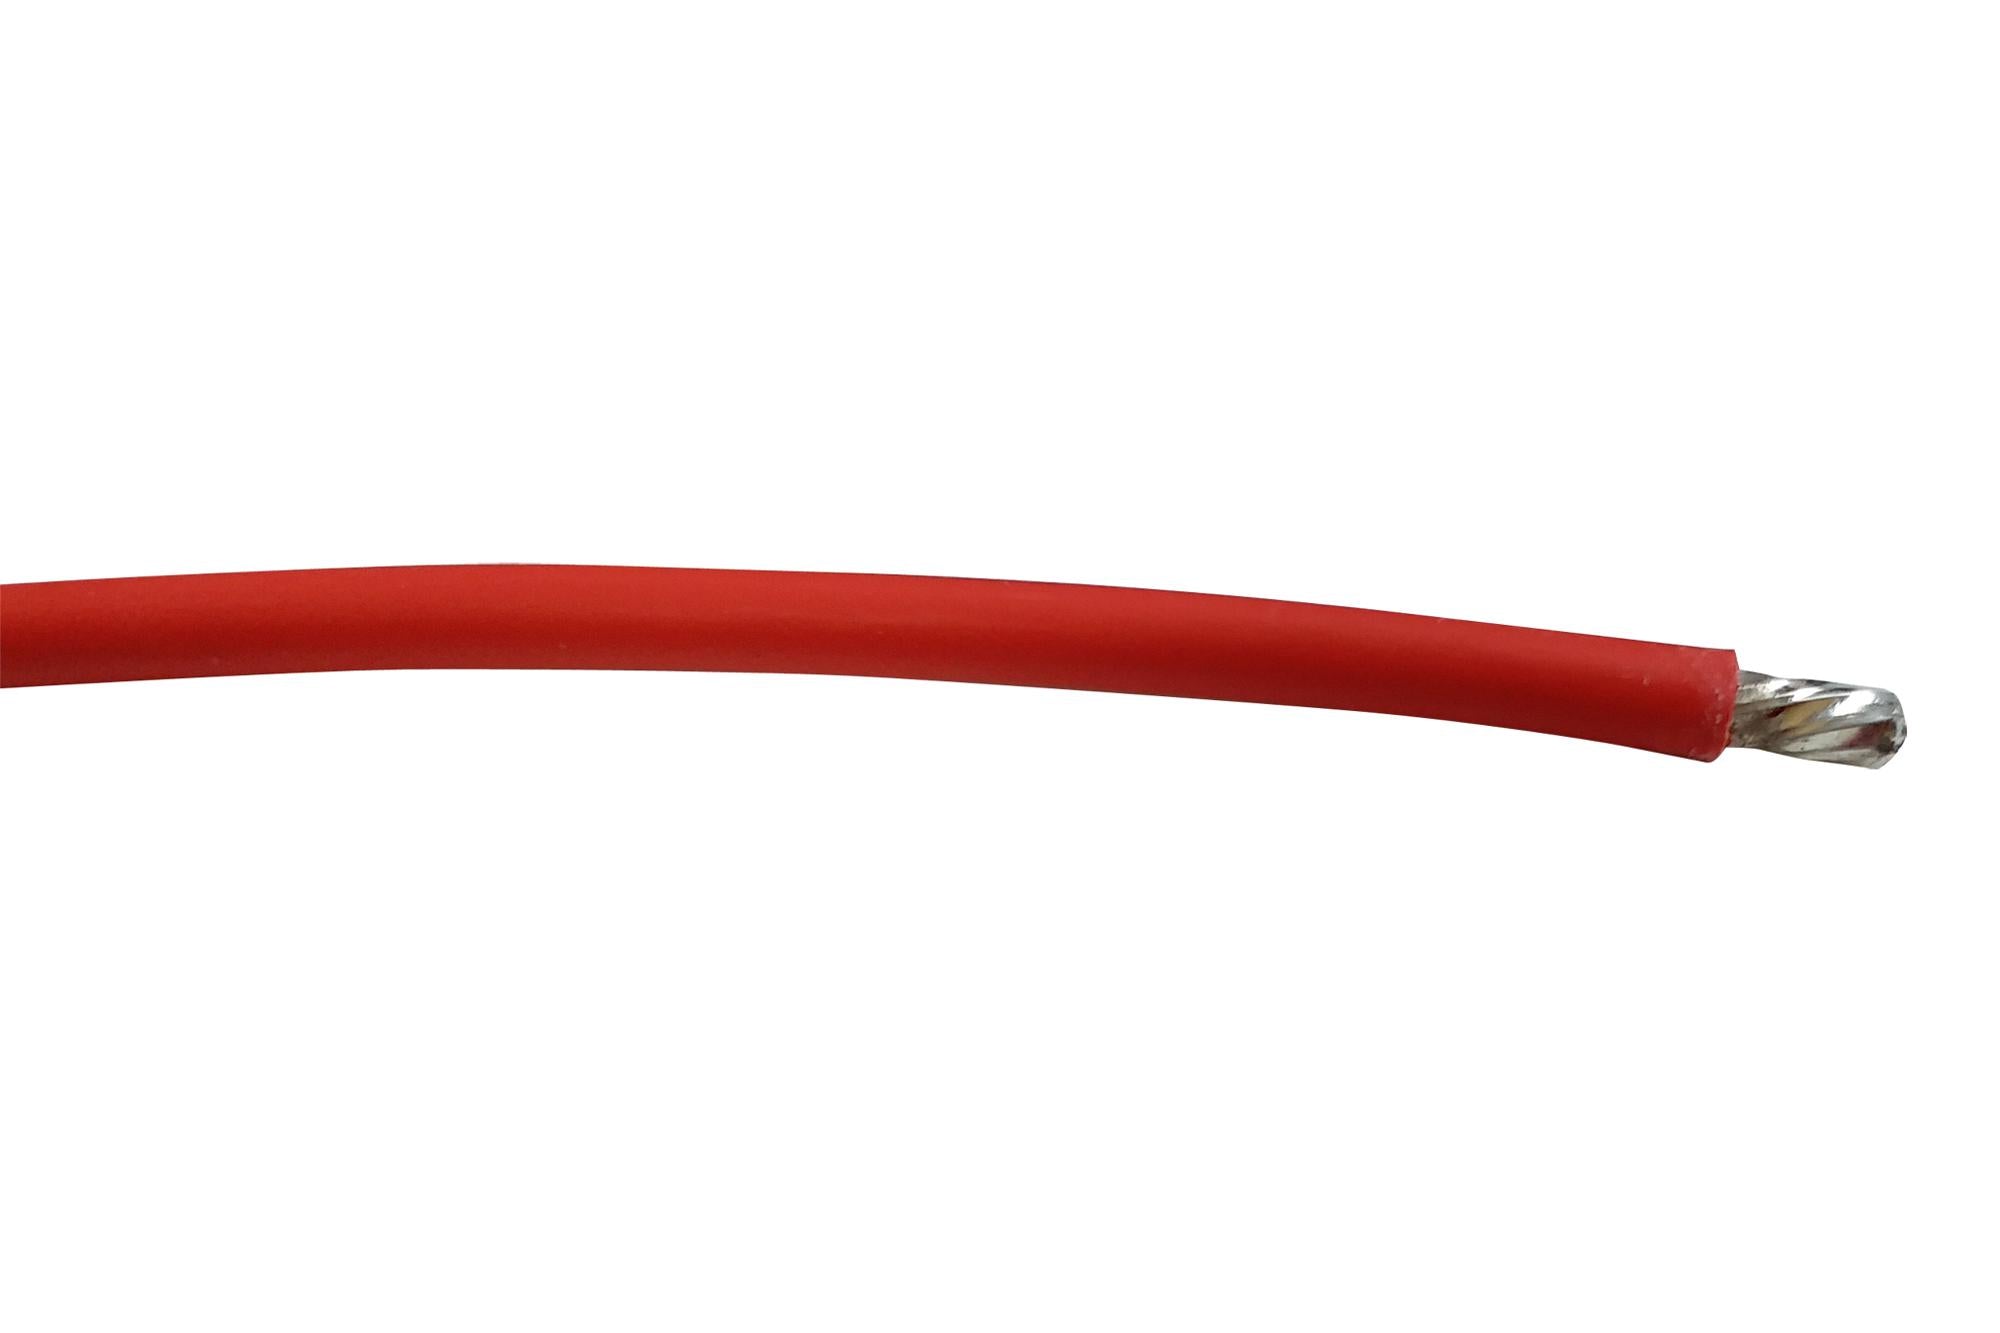 PP002414 HOOK-UP WIRE, 30AWG, RED, 305M, 300V PRO POWER